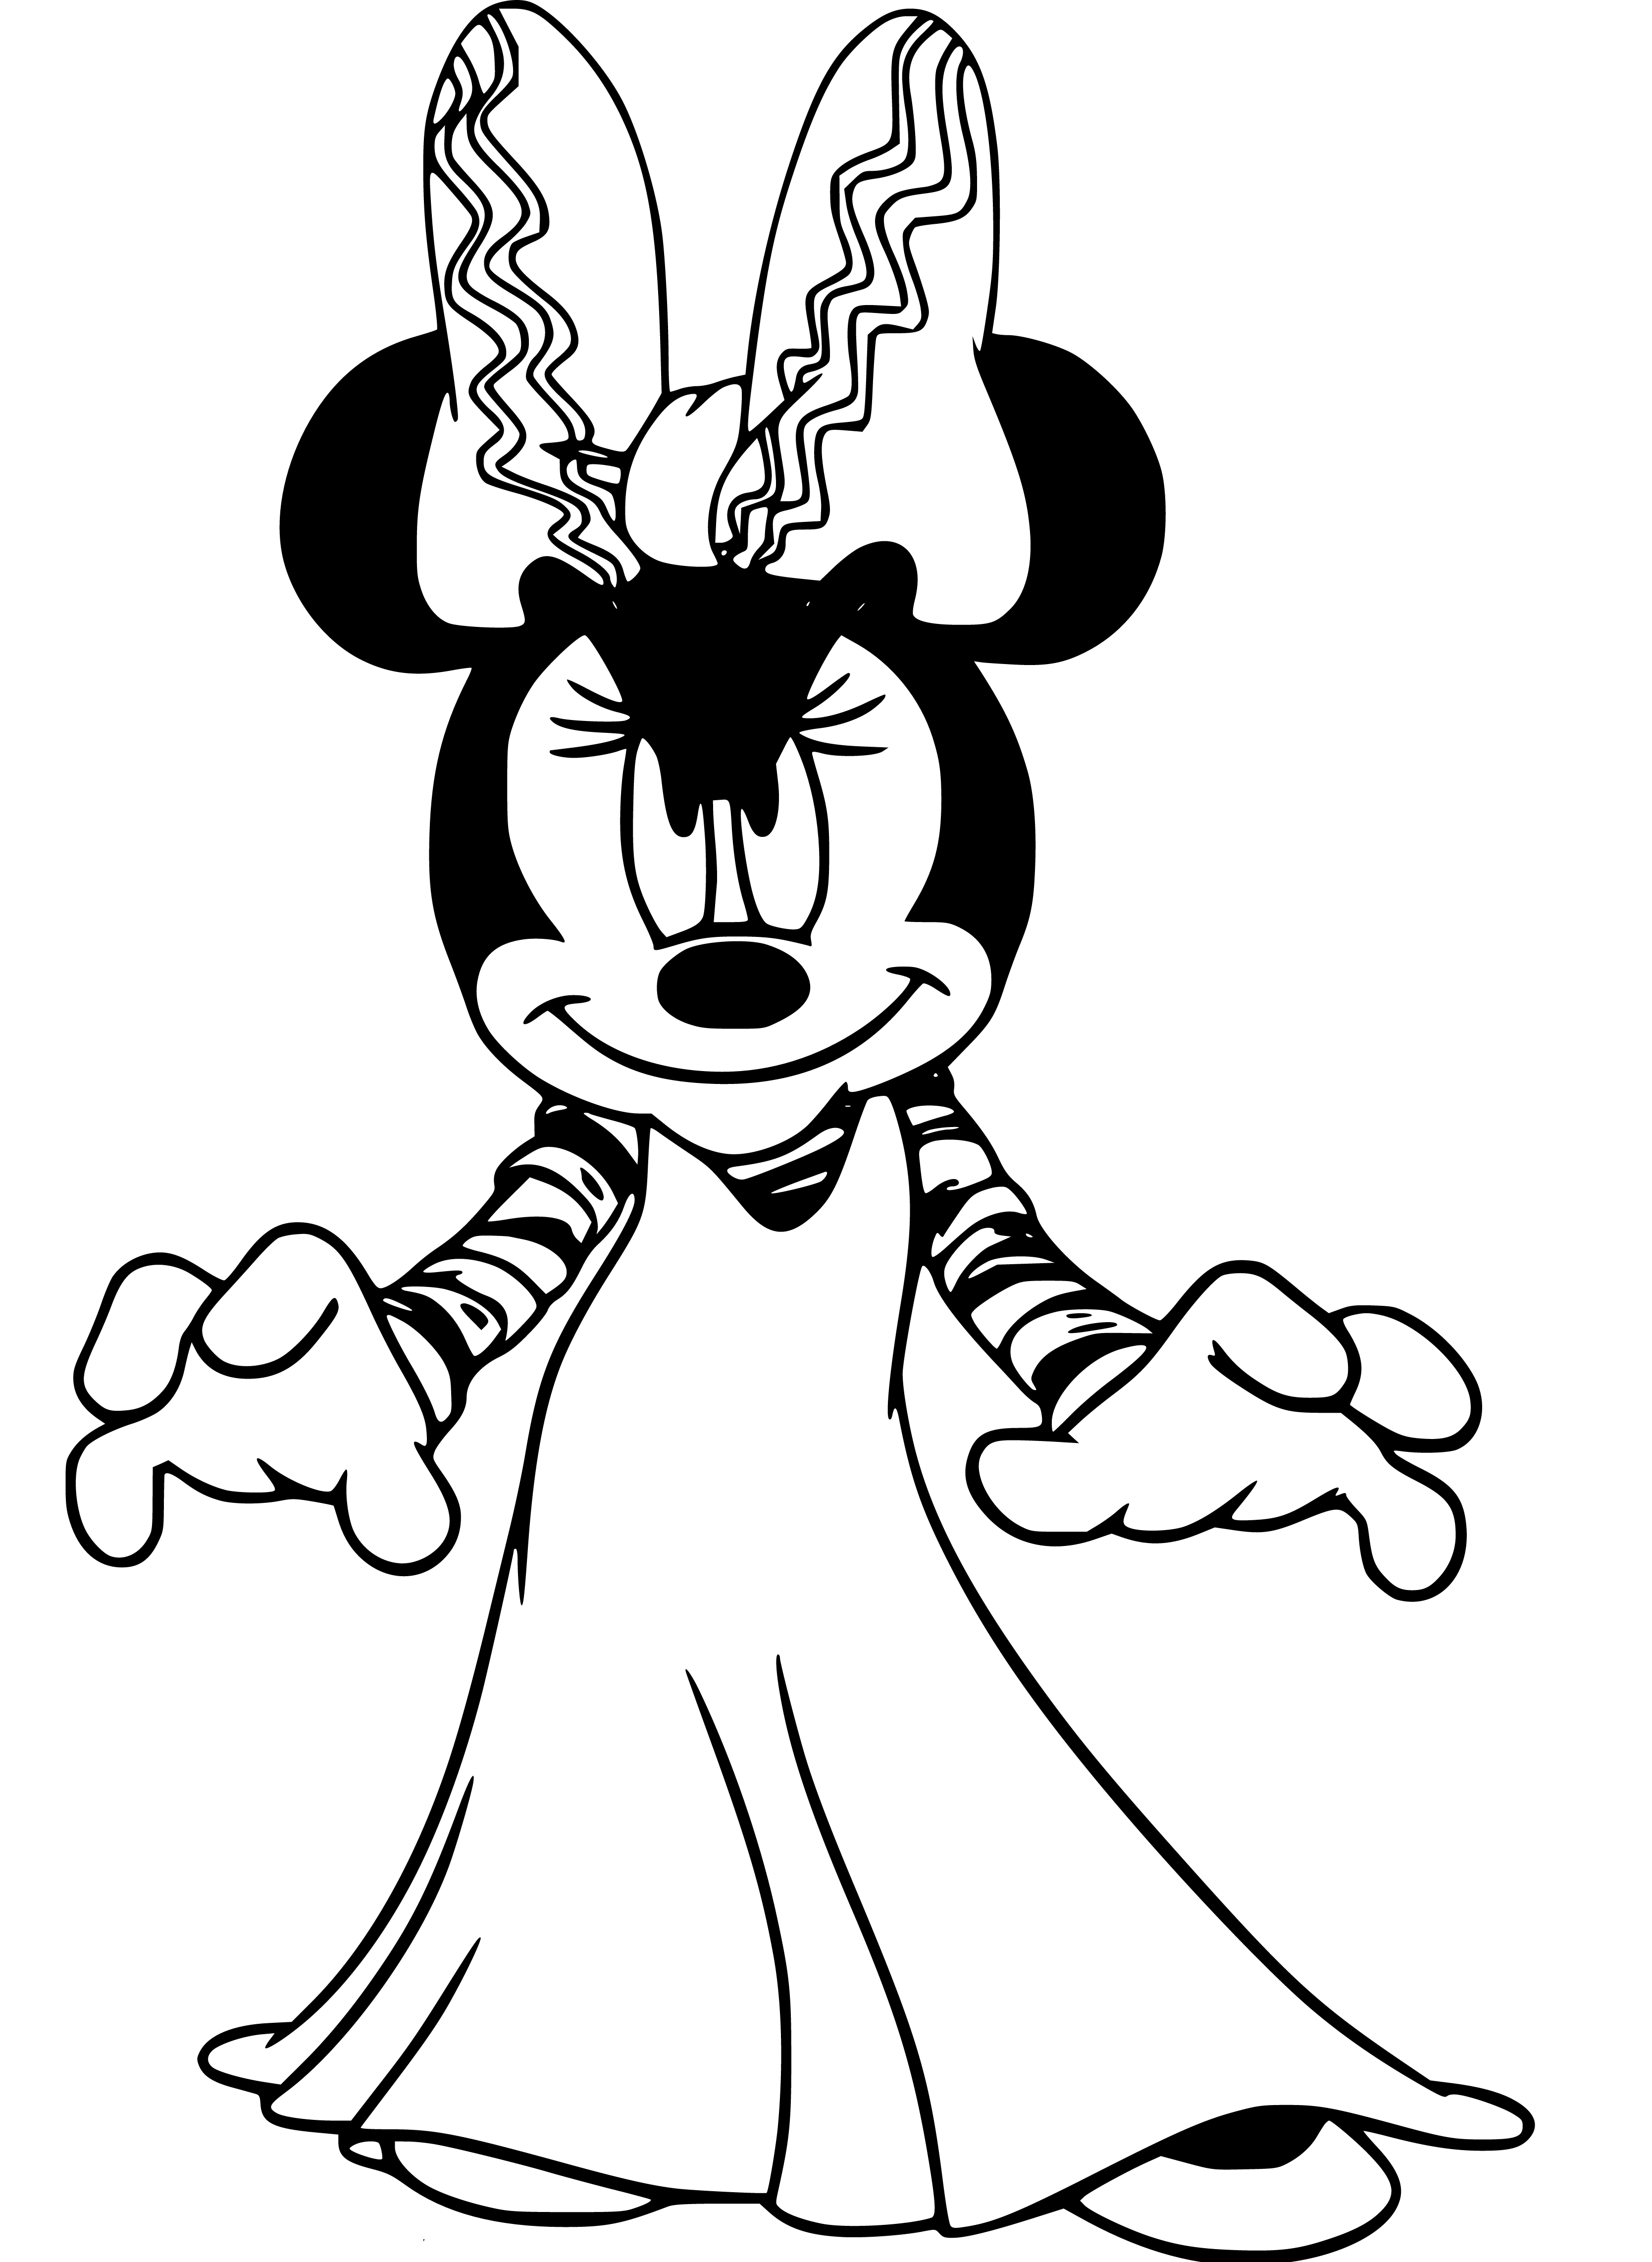 Scary Minnie Mouse Halloween Coloring Page - SheetalColor.com